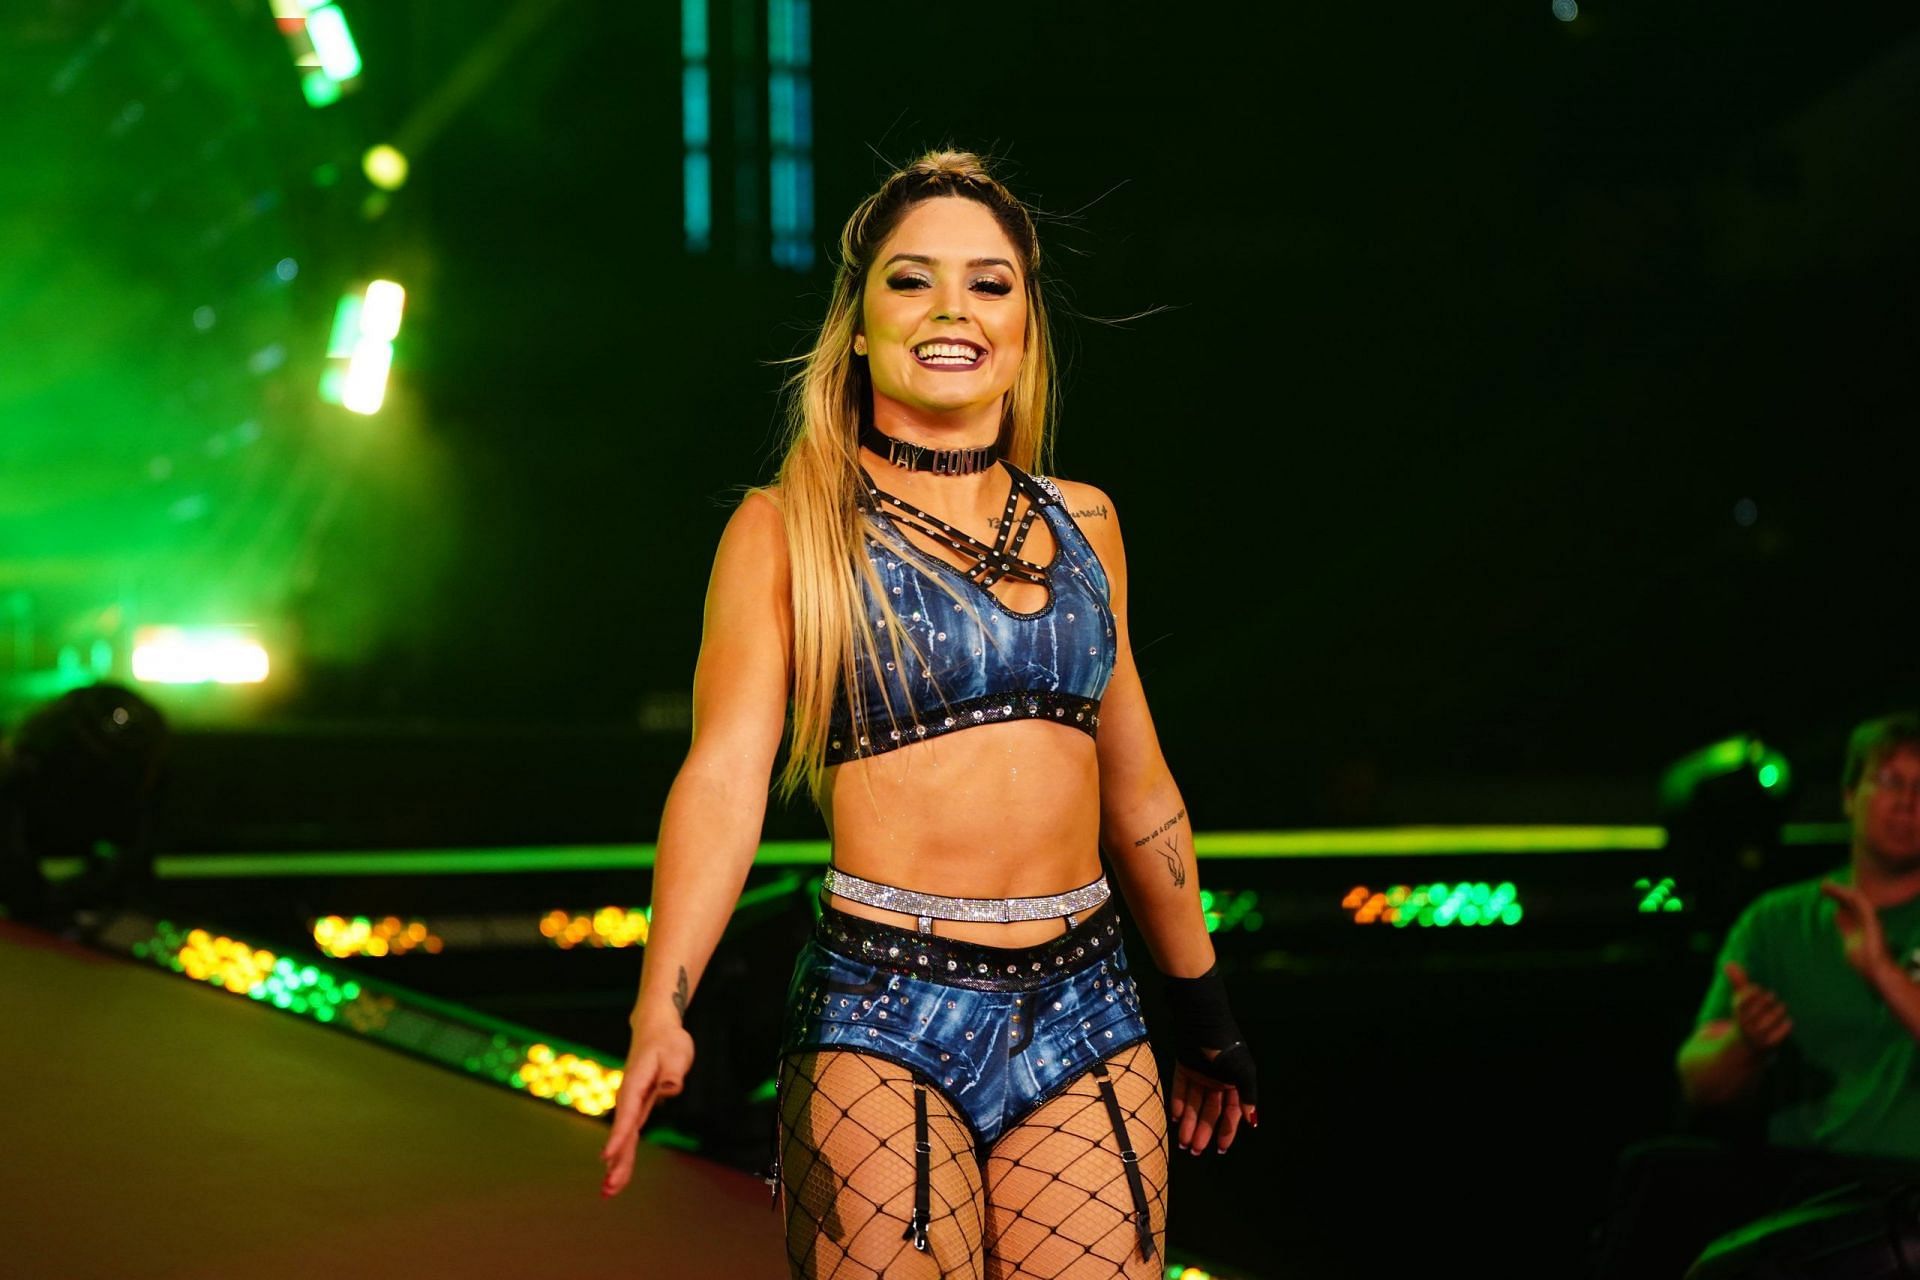 The former WWE NXT star was in action at Revolution 2022.